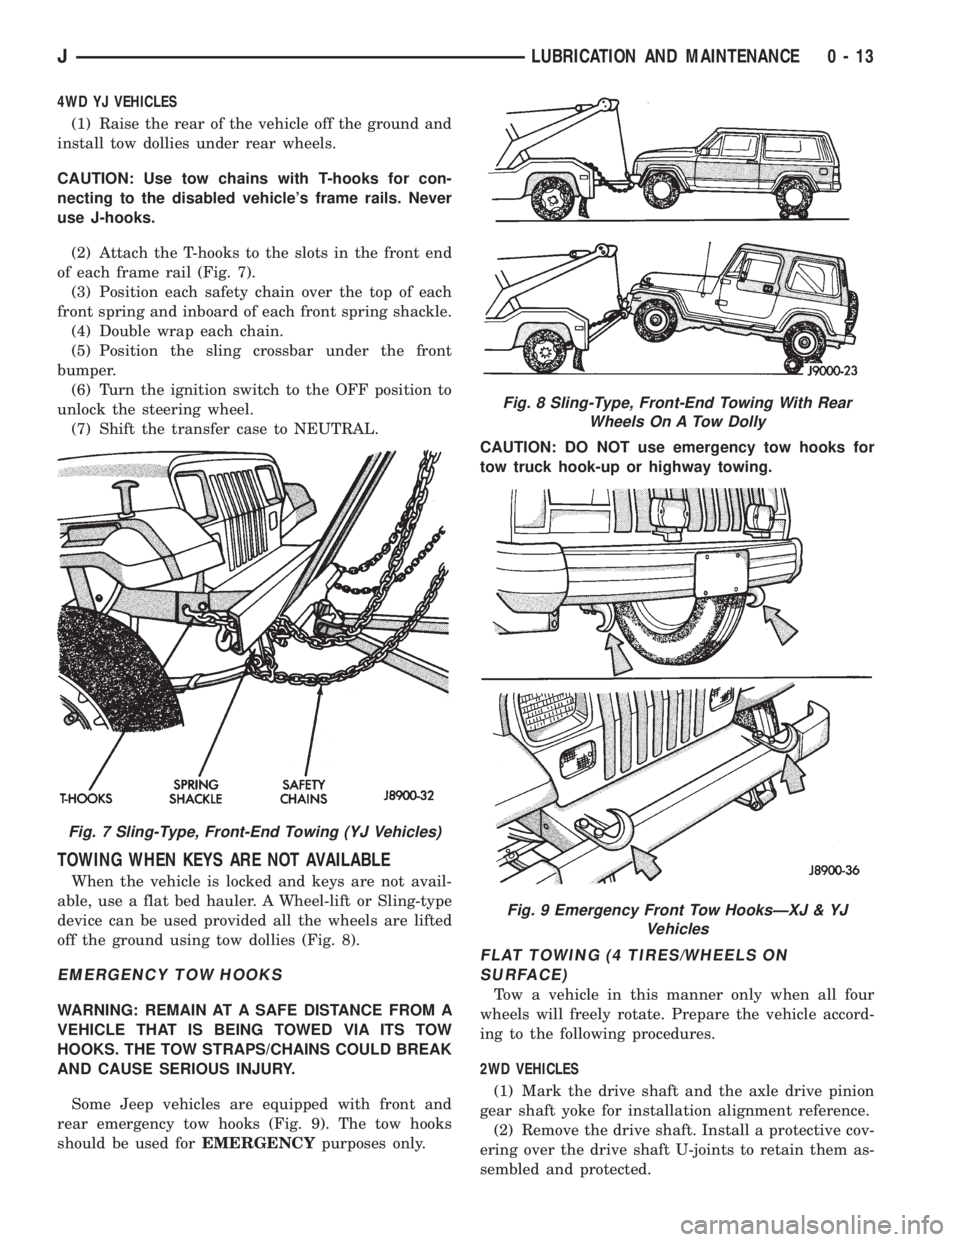 JEEP CHEROKEE 1995  Service Repair Manual 4WD YJ VEHICLES
(1) Raise the rear of the vehicle off the ground and
install tow dollies under rear wheels.
CAUTION: Use tow chains with T-hooks for con-
necting to the disabled vehicles frame rails.